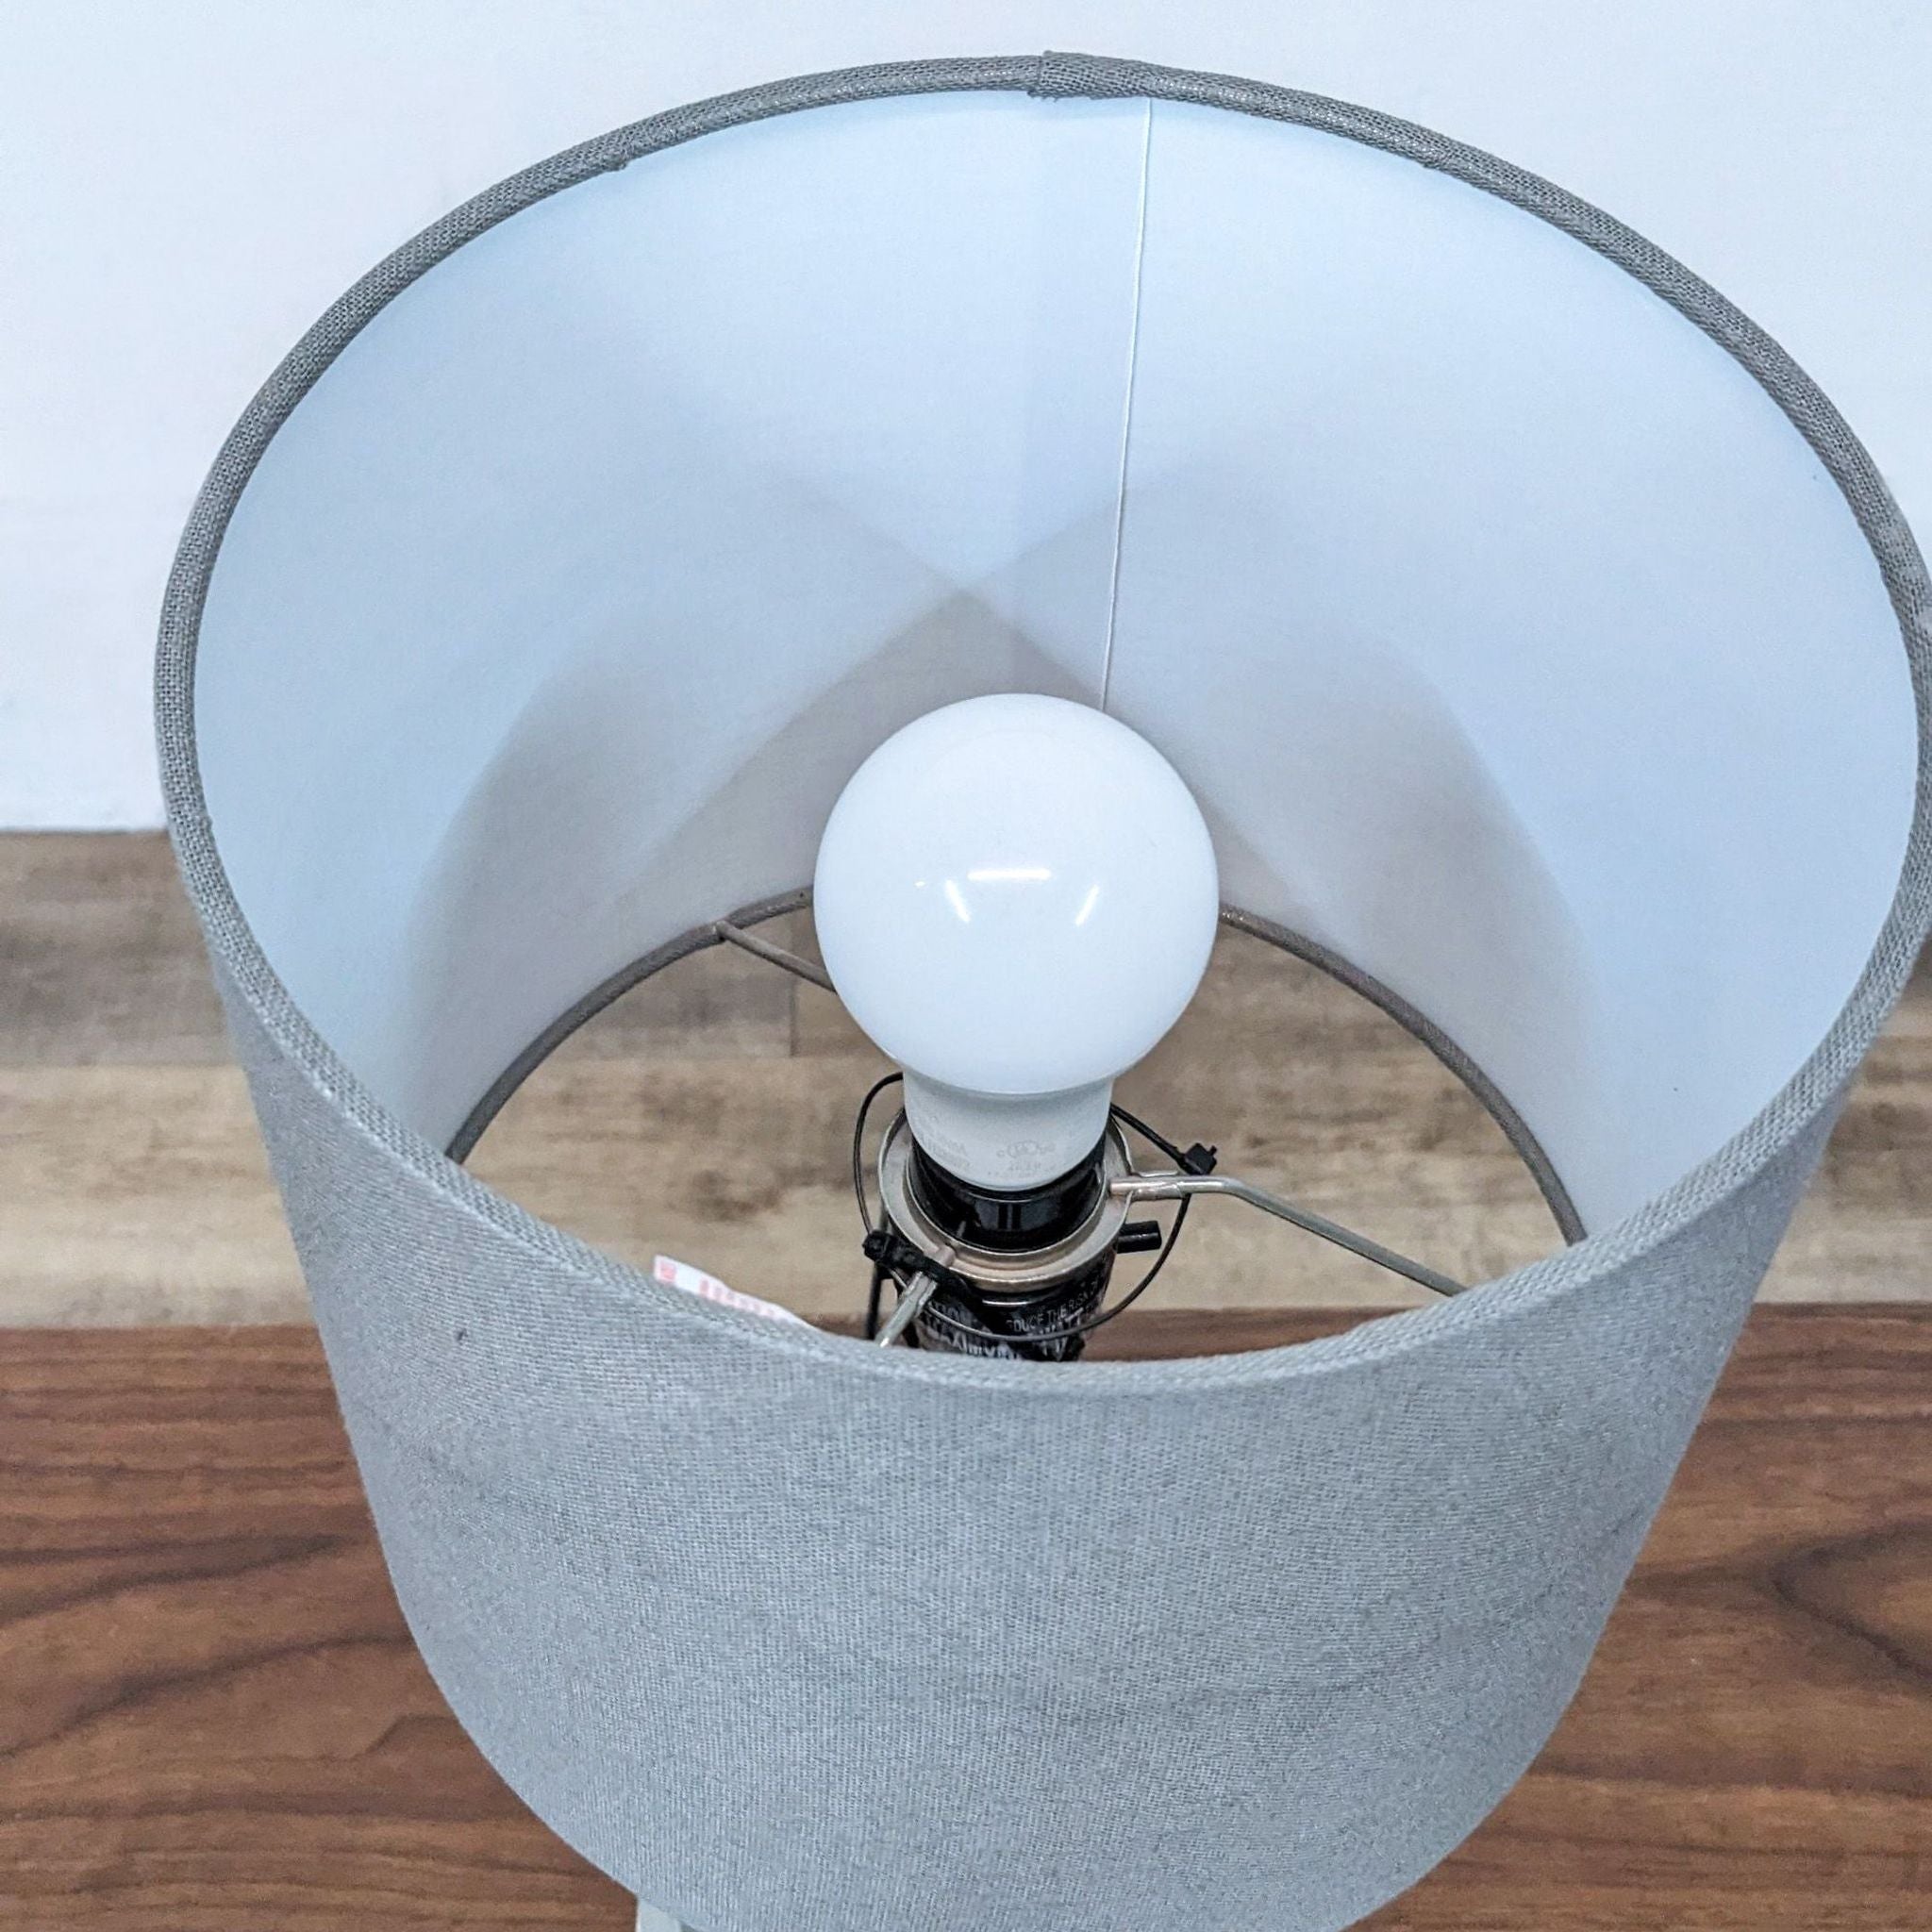 Top view of a Reperch lamp showing a lit bulb and inside of the grey lampshade.